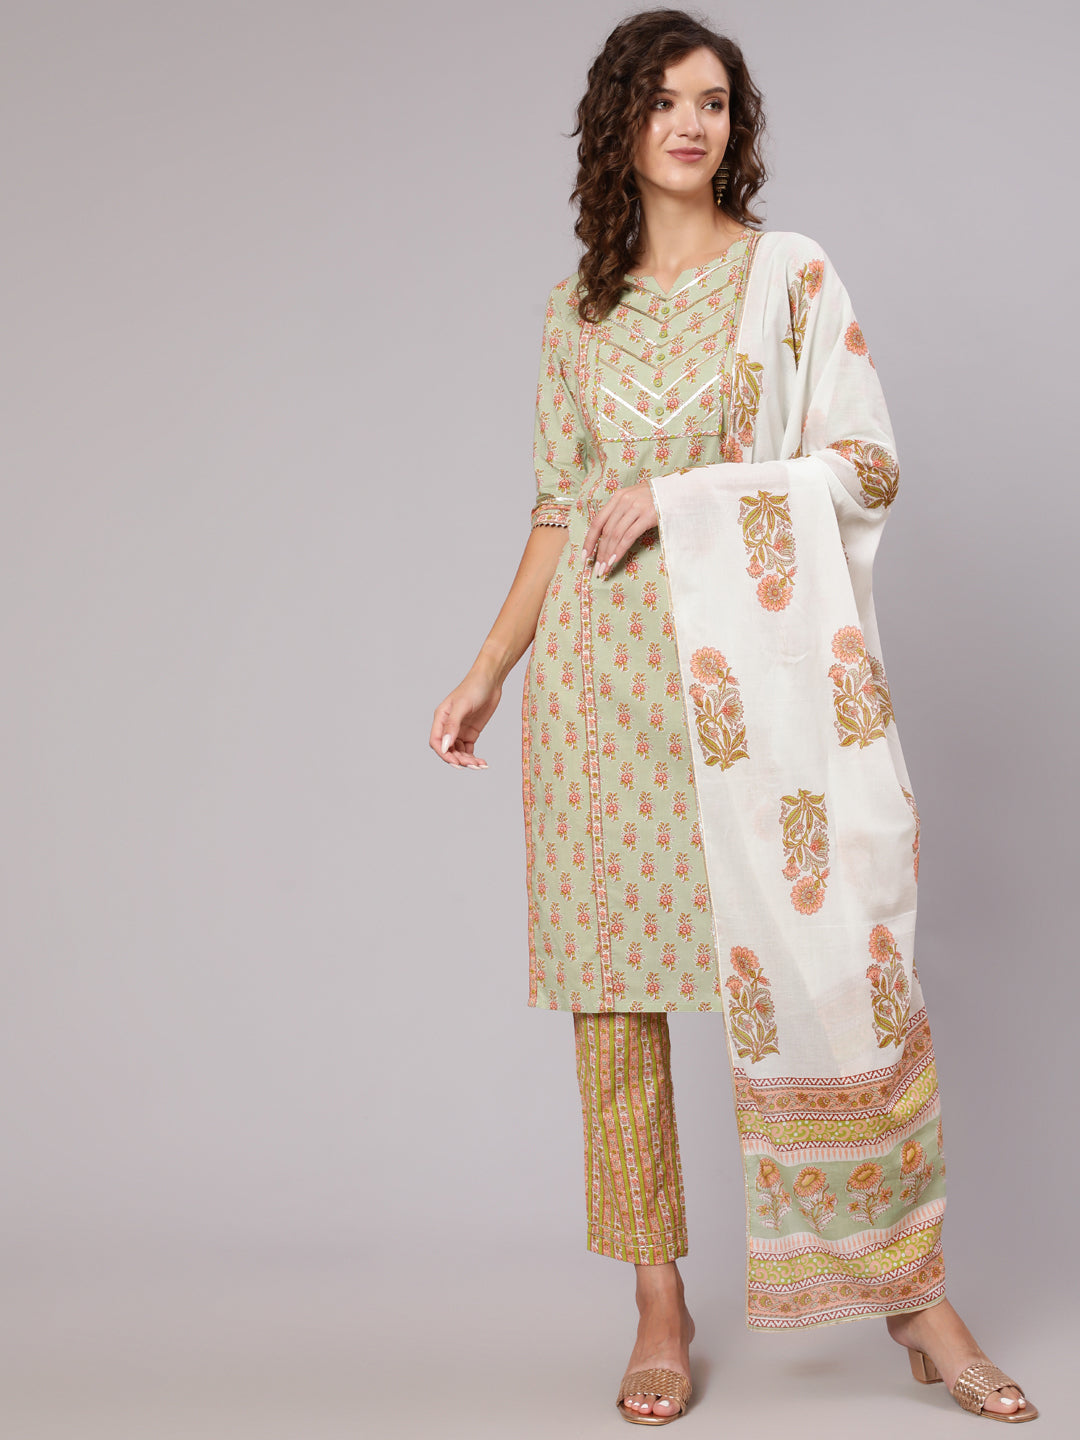 A Green Straight Ethnic Printed Gota Embellished Kurta With Printed Pants And Dupatta